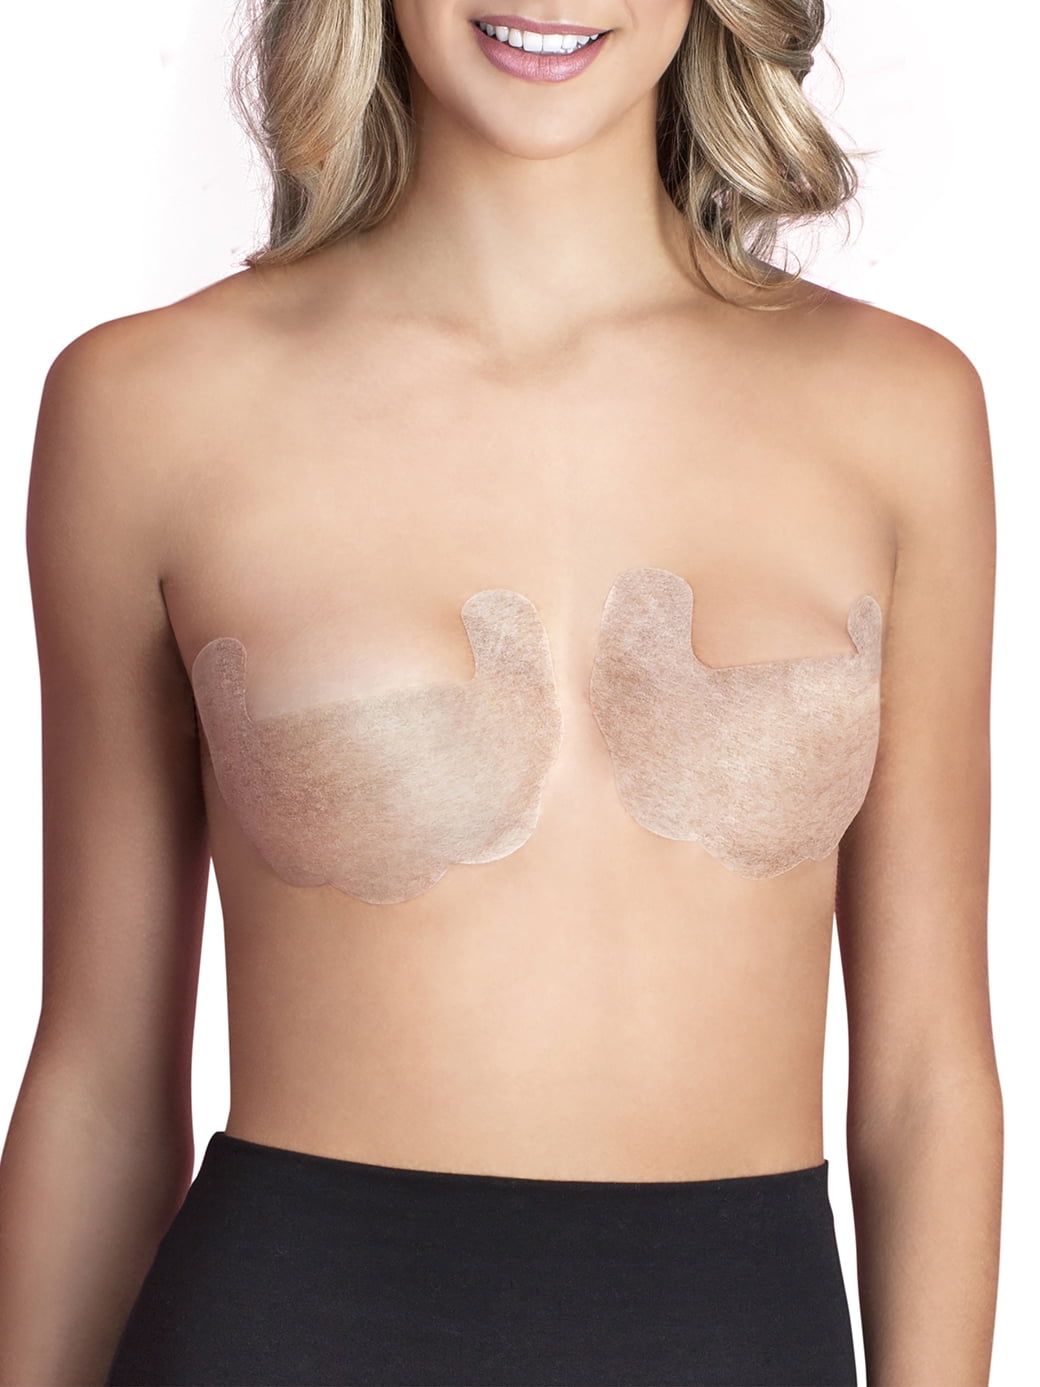 Lingerie Solutions Women's Disposable Adhesive Backless Strapless Body Bra Nude